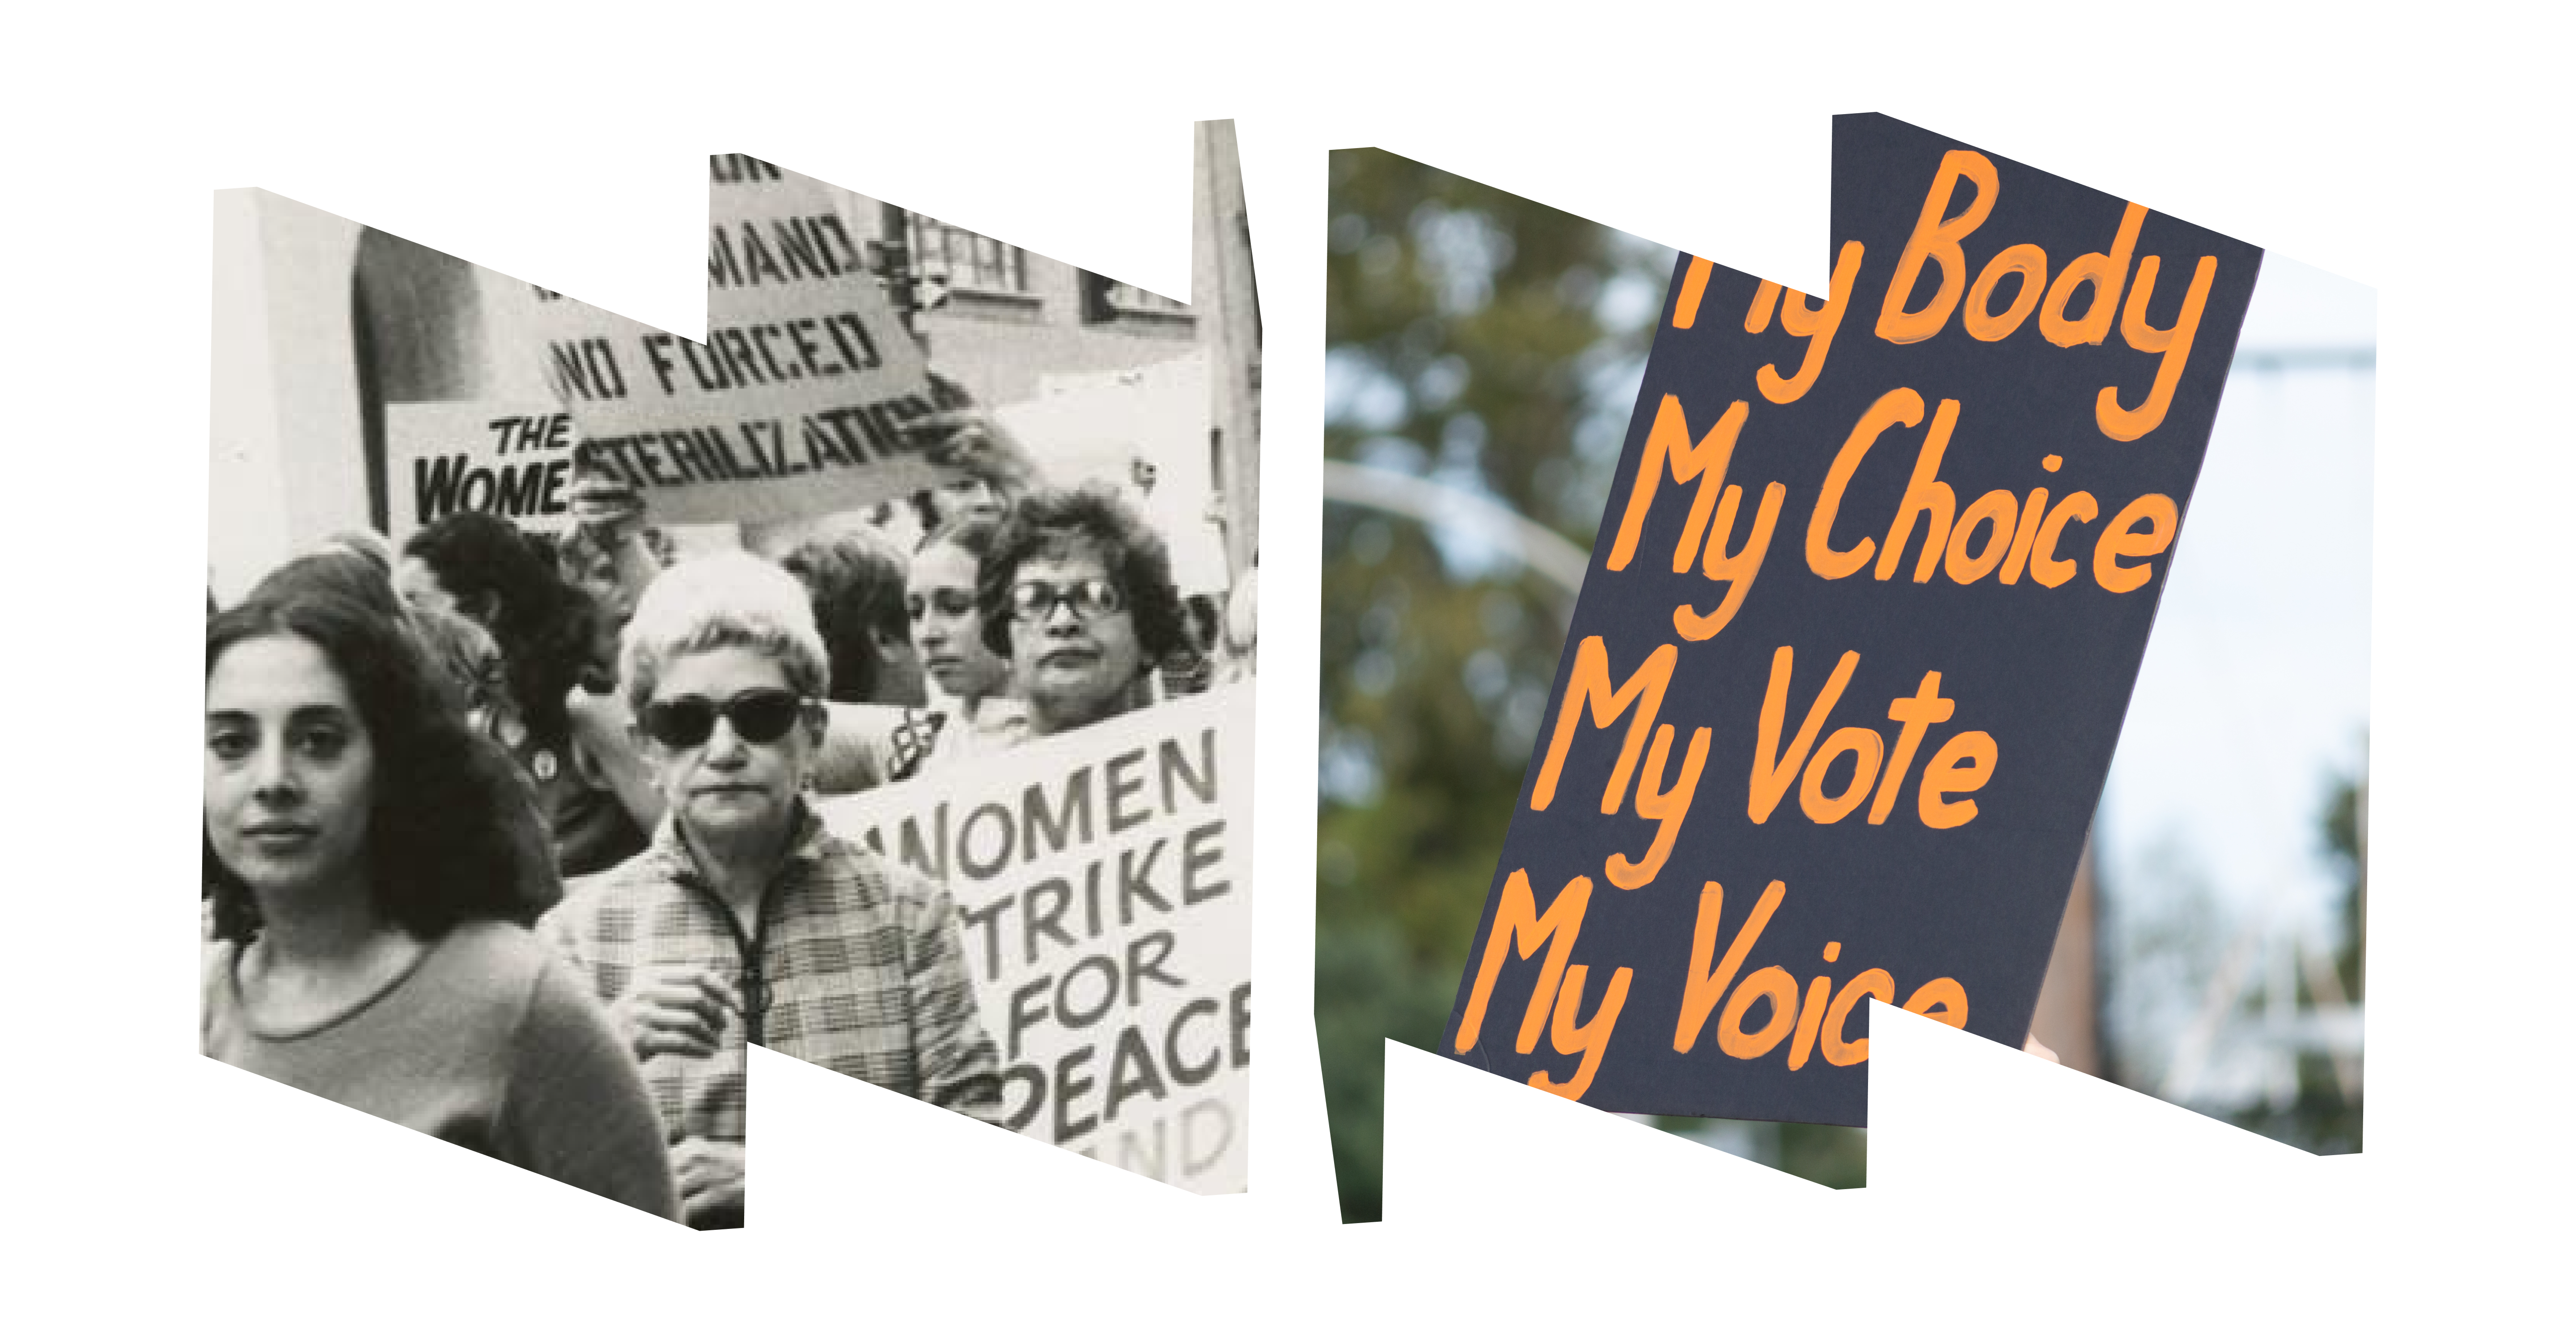 Two "W" frames: Left frame shows women marching in the 1970s at the March for Equality, right frame shows a sign that says "My Body, My Choice, My Vote, My Voice." 